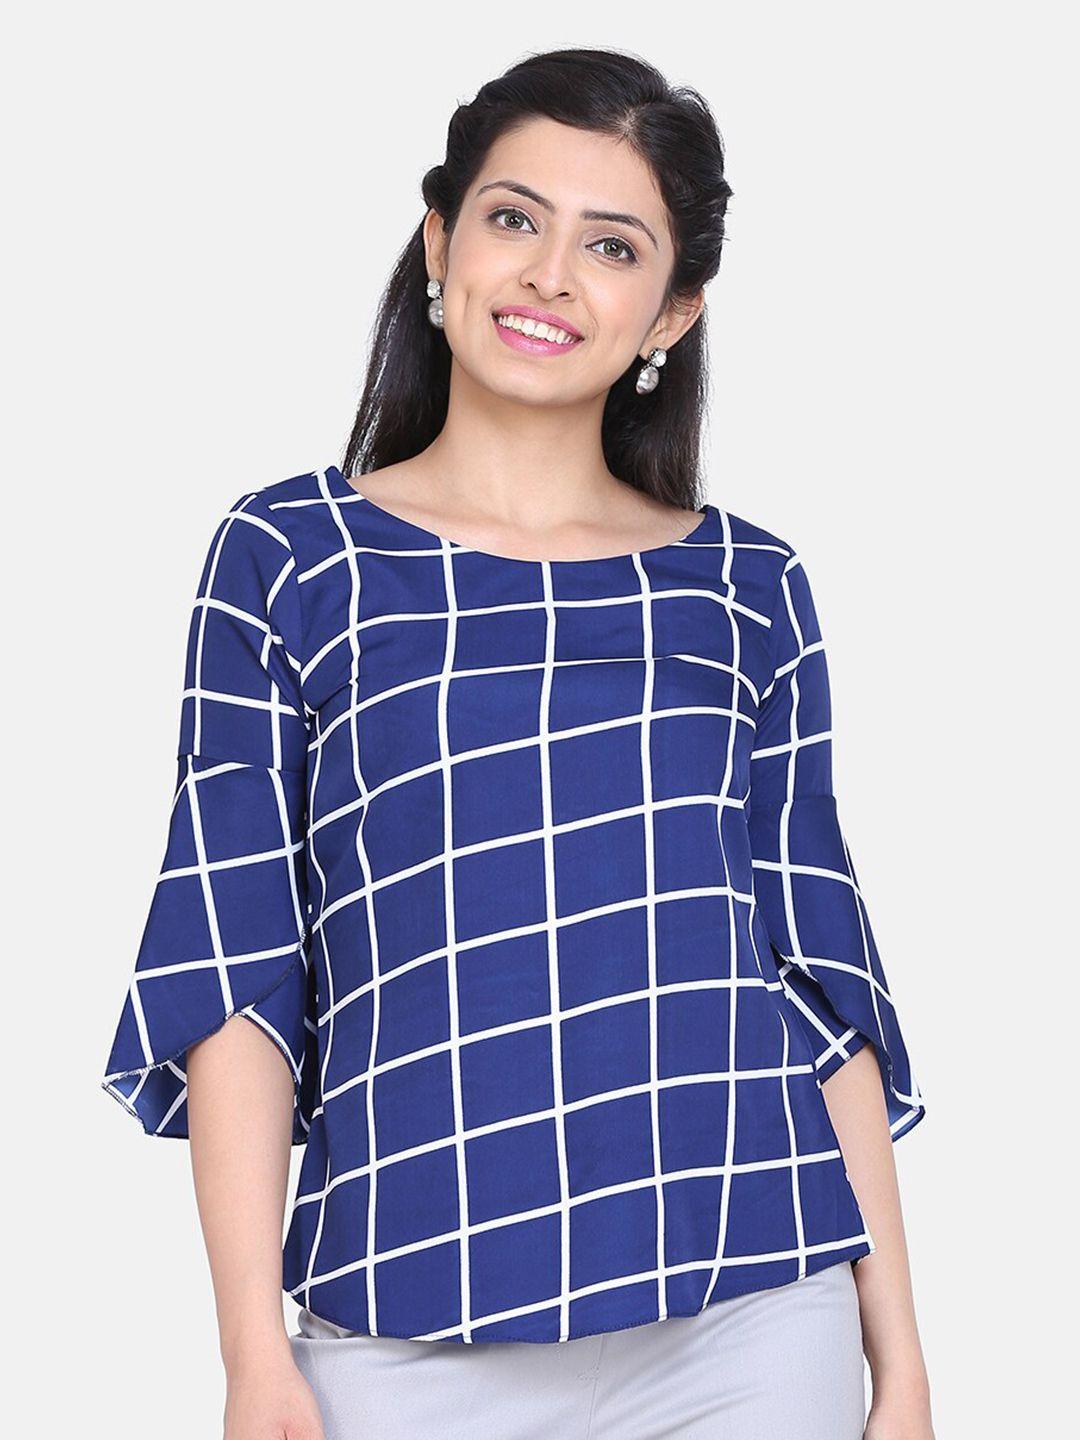 powersutra women blue & white checked crepe top